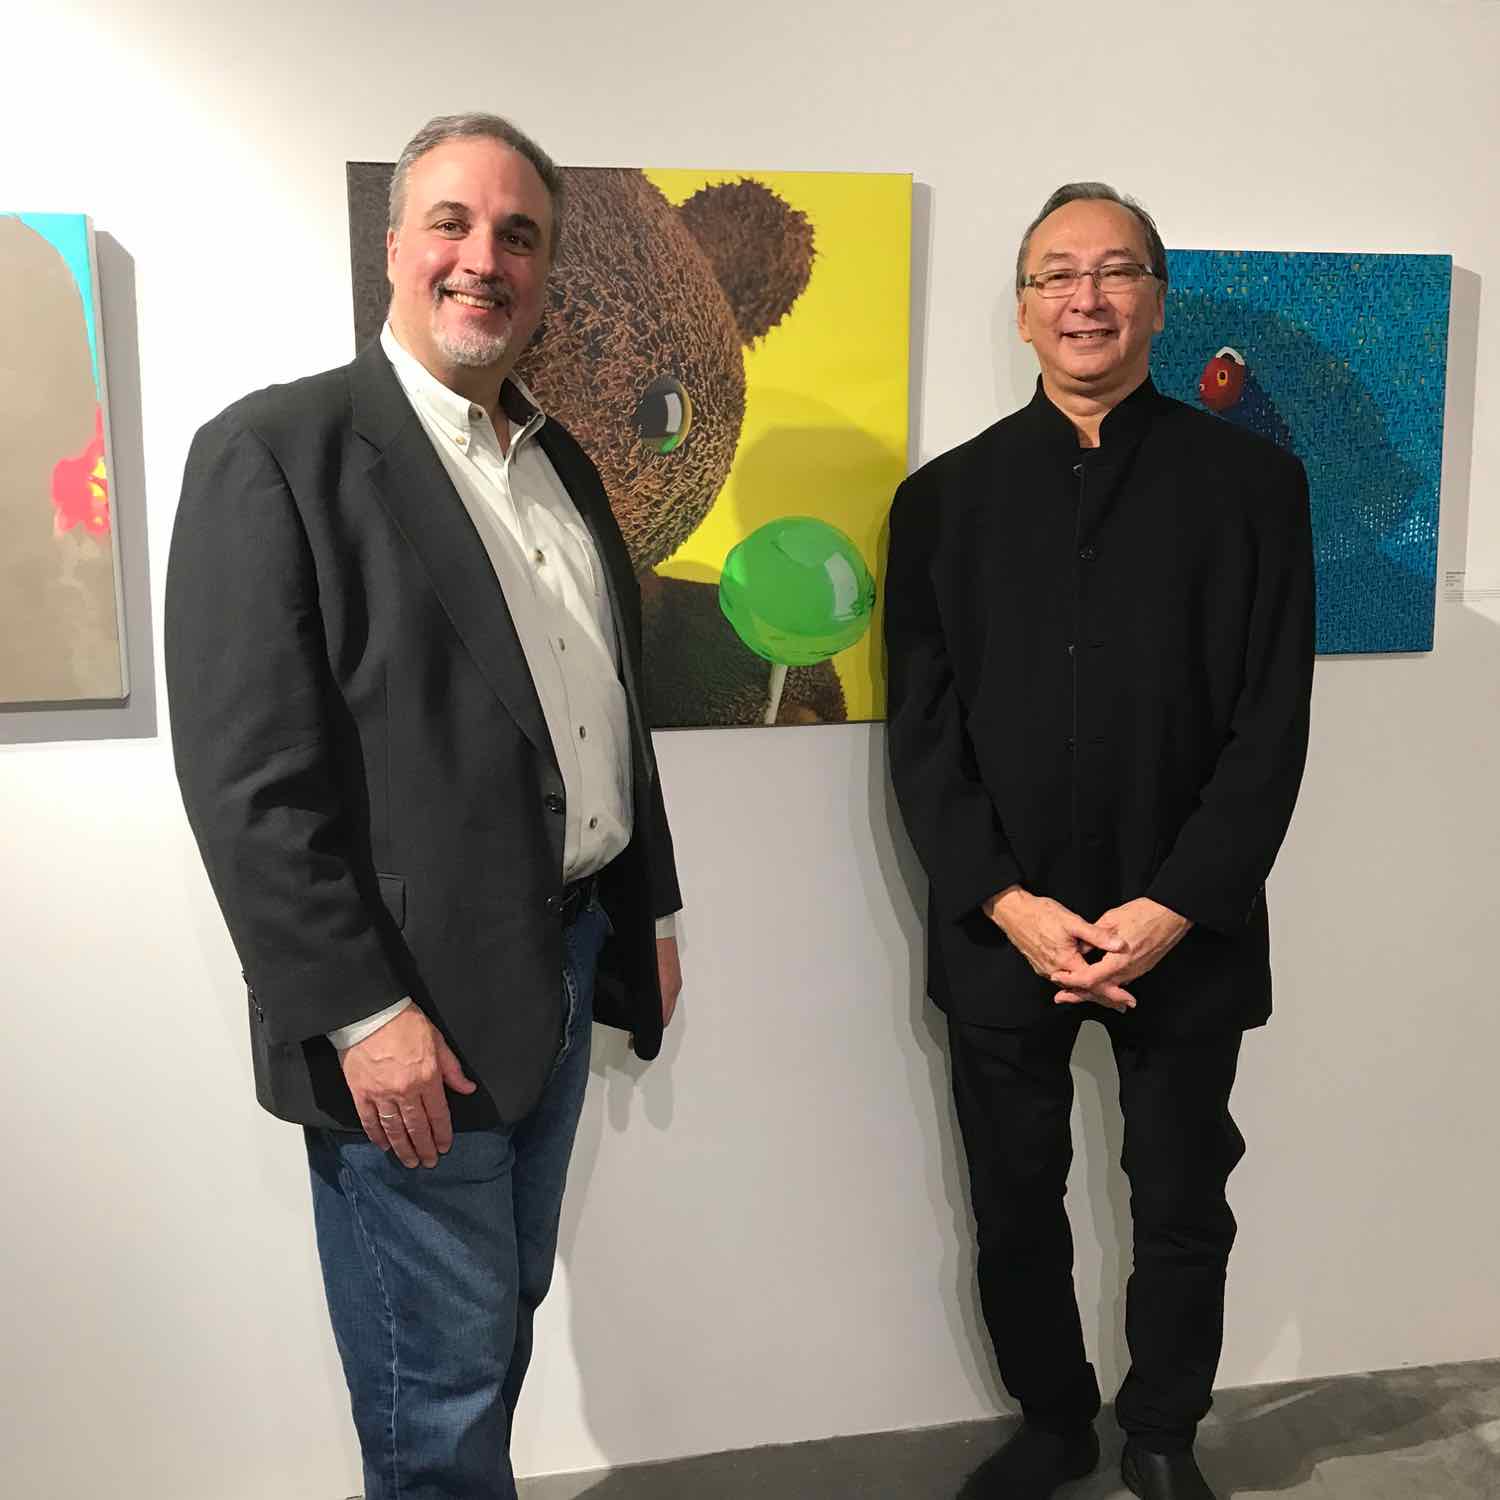 Me and Jurist Bill Stelling, from Kelley Stelling Contemporary in front of Sharing #1